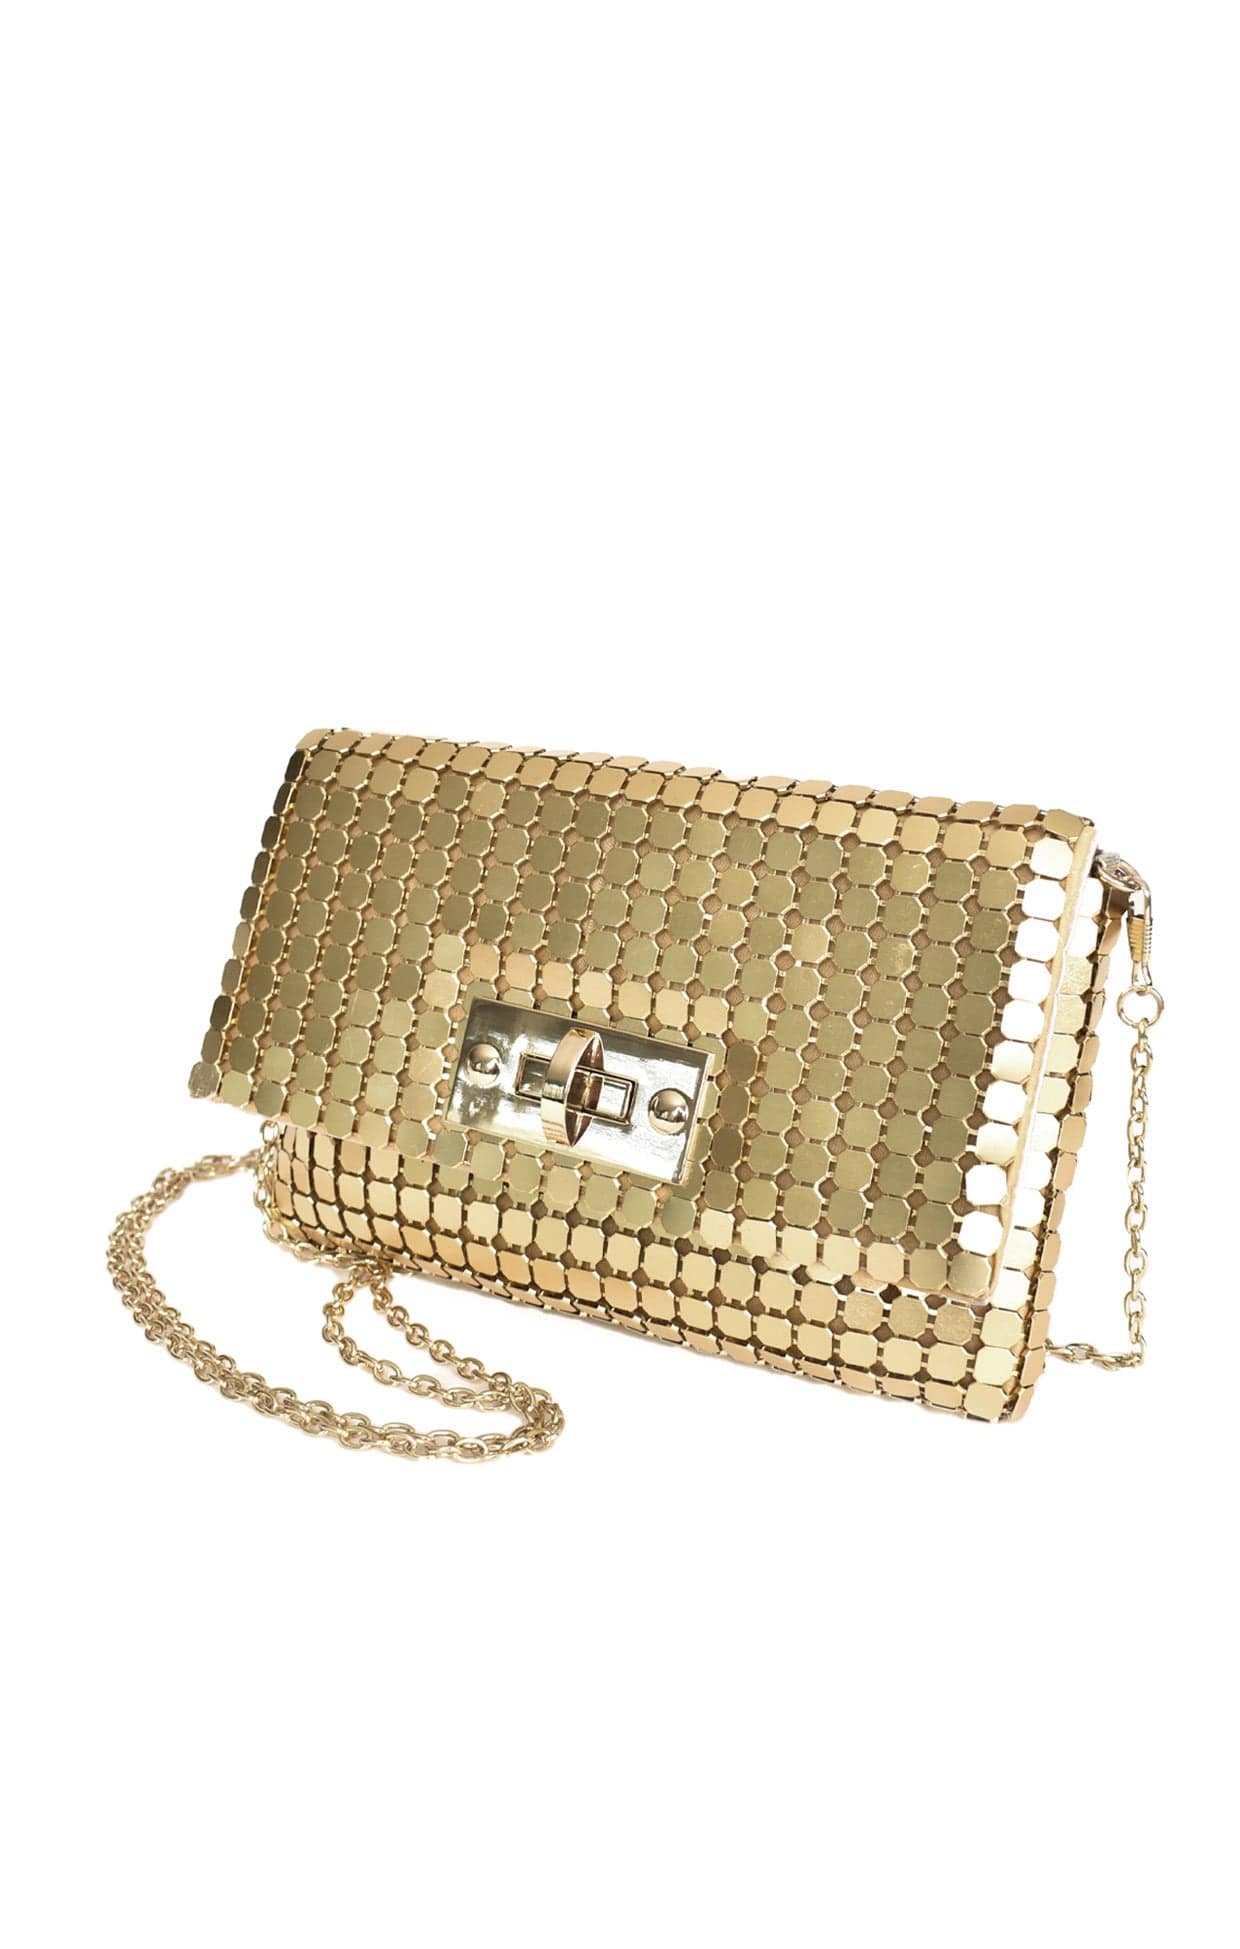 ACCESSORIES Bags Clutches One Size / Neutral CHAIN MESH TOGGLE FRONT CLUTCH IN GOLD